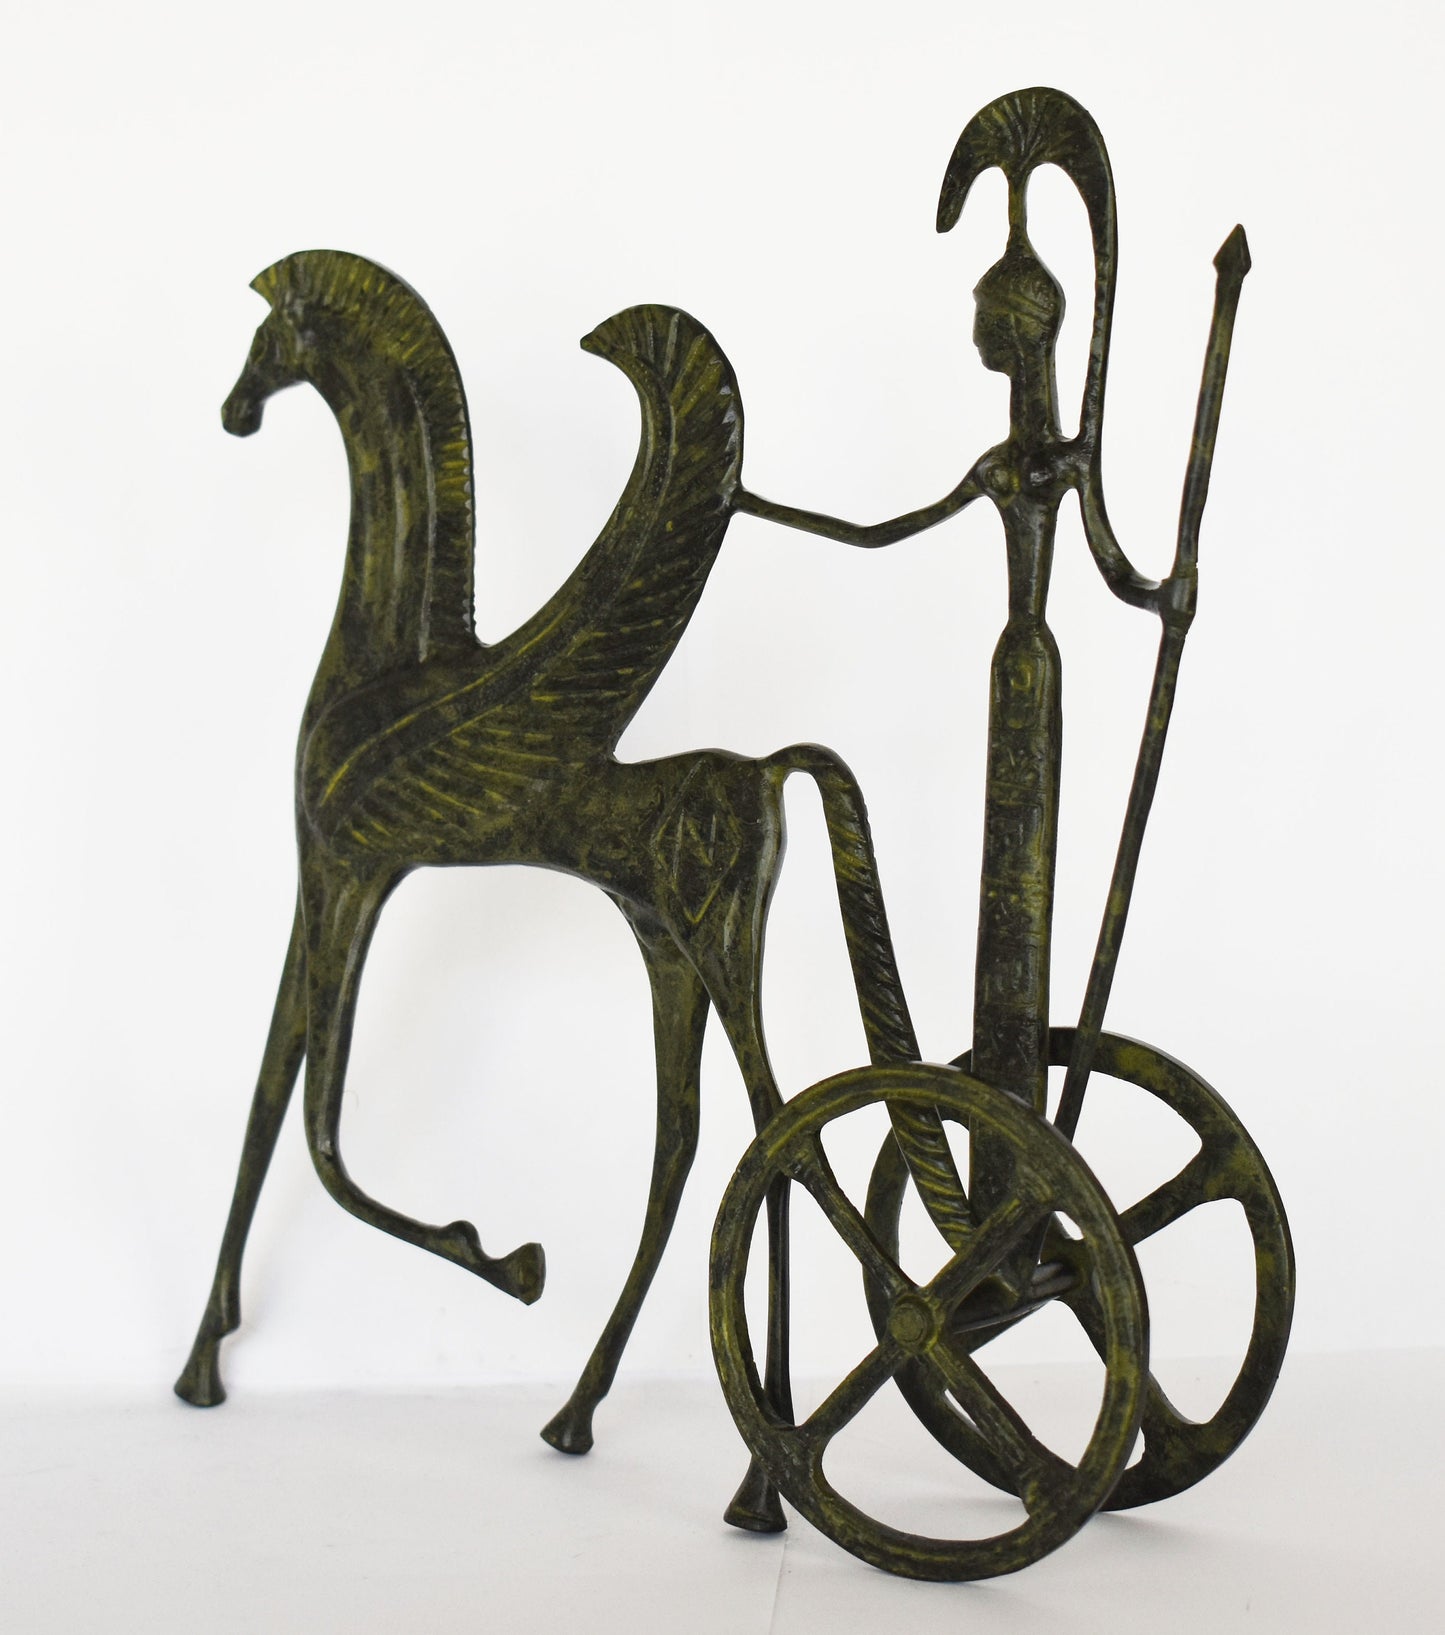 Ancient  Greek Chariot - Goddess Athena with Spear and Pegasus, the Flying Horse - pure Bronze Sculpture